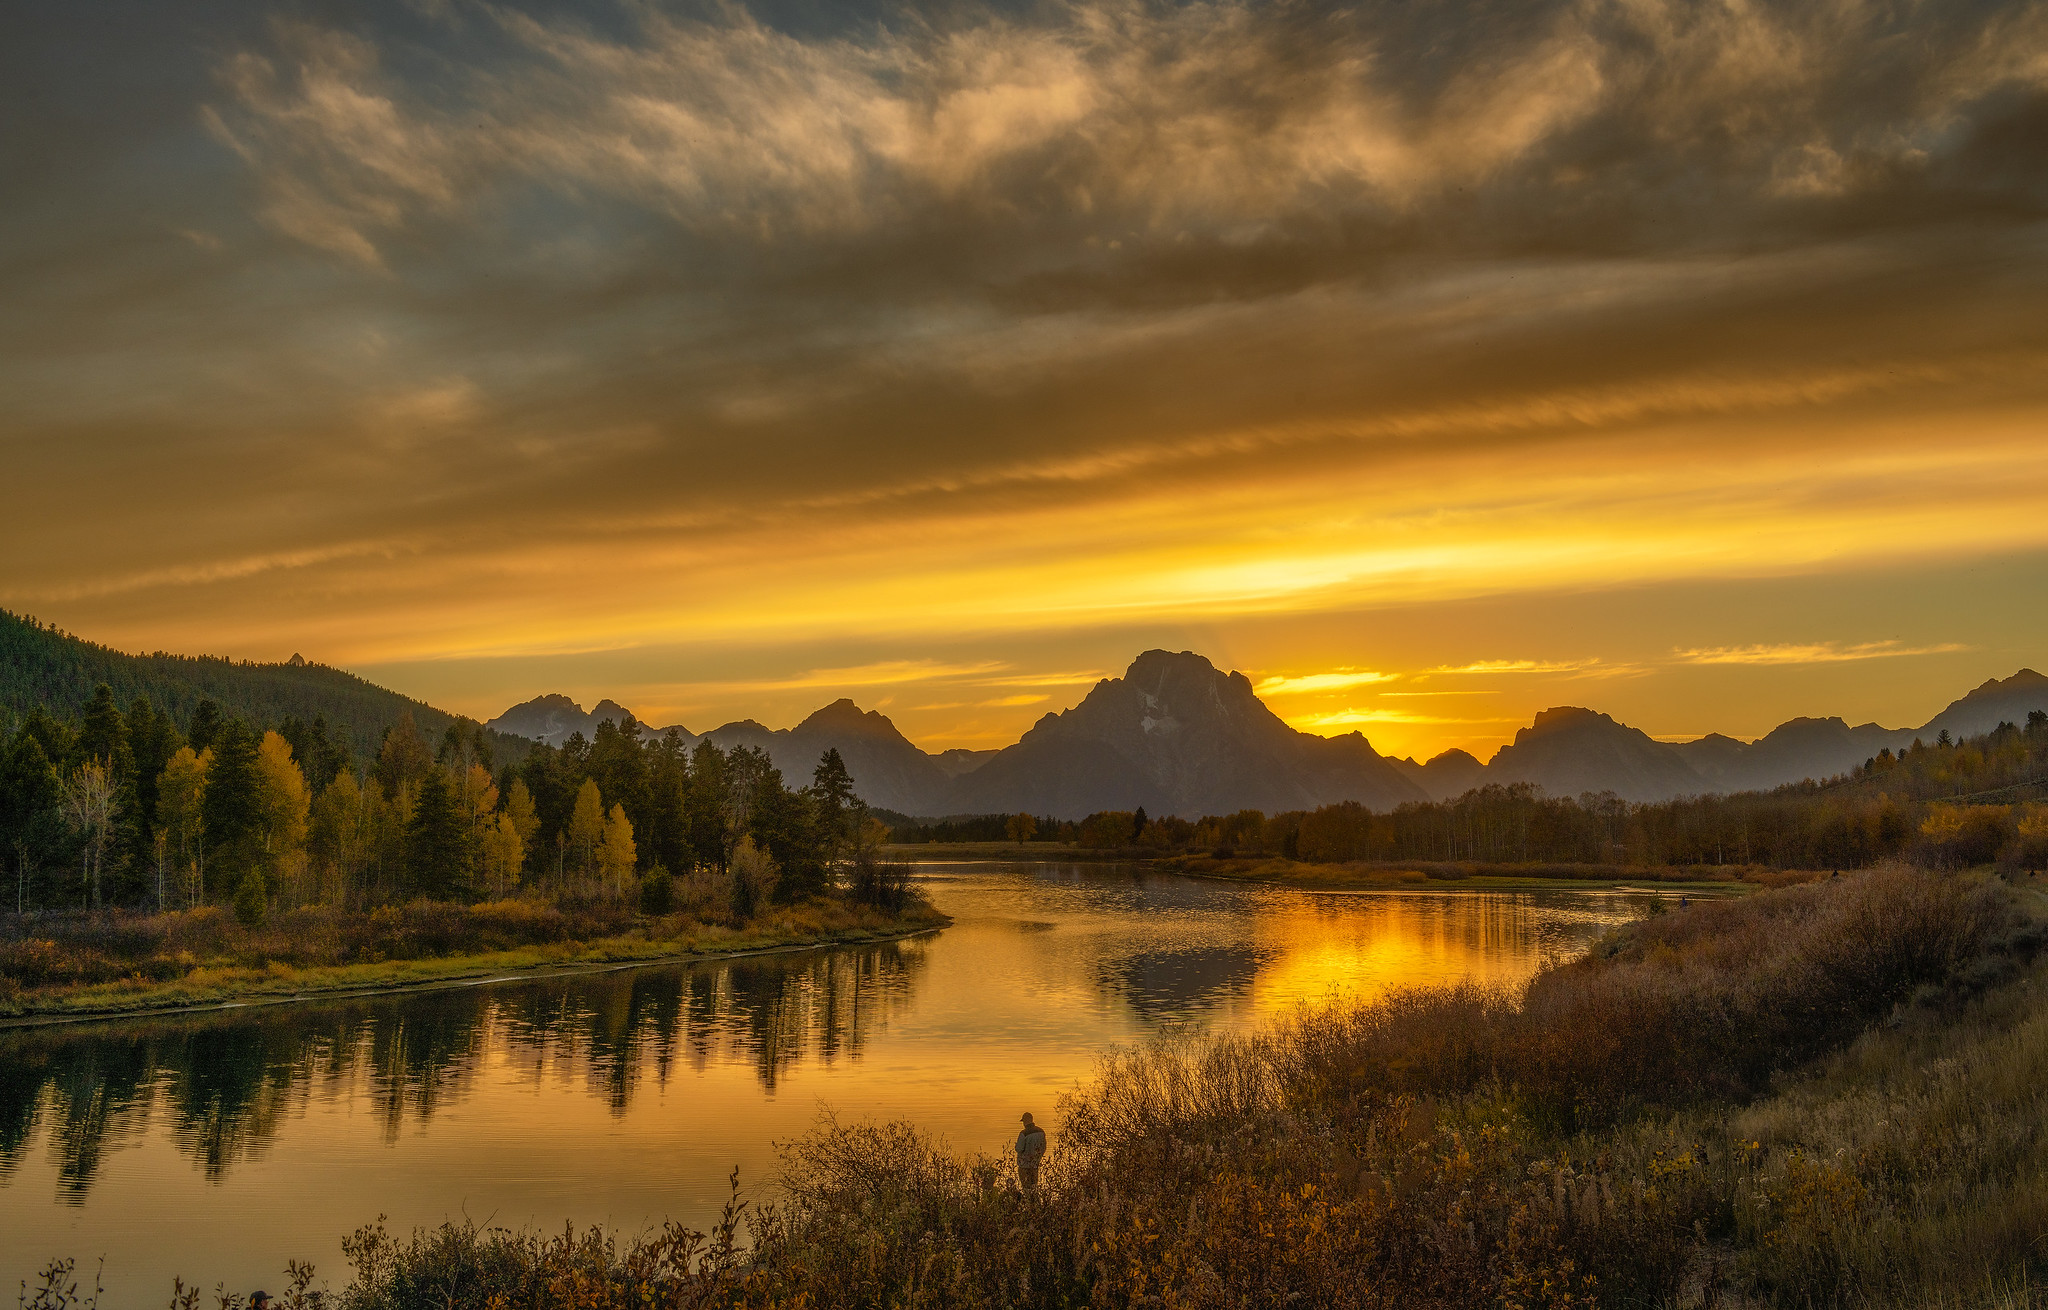 Sunset at Grand Teton National Park by Peter Cheung